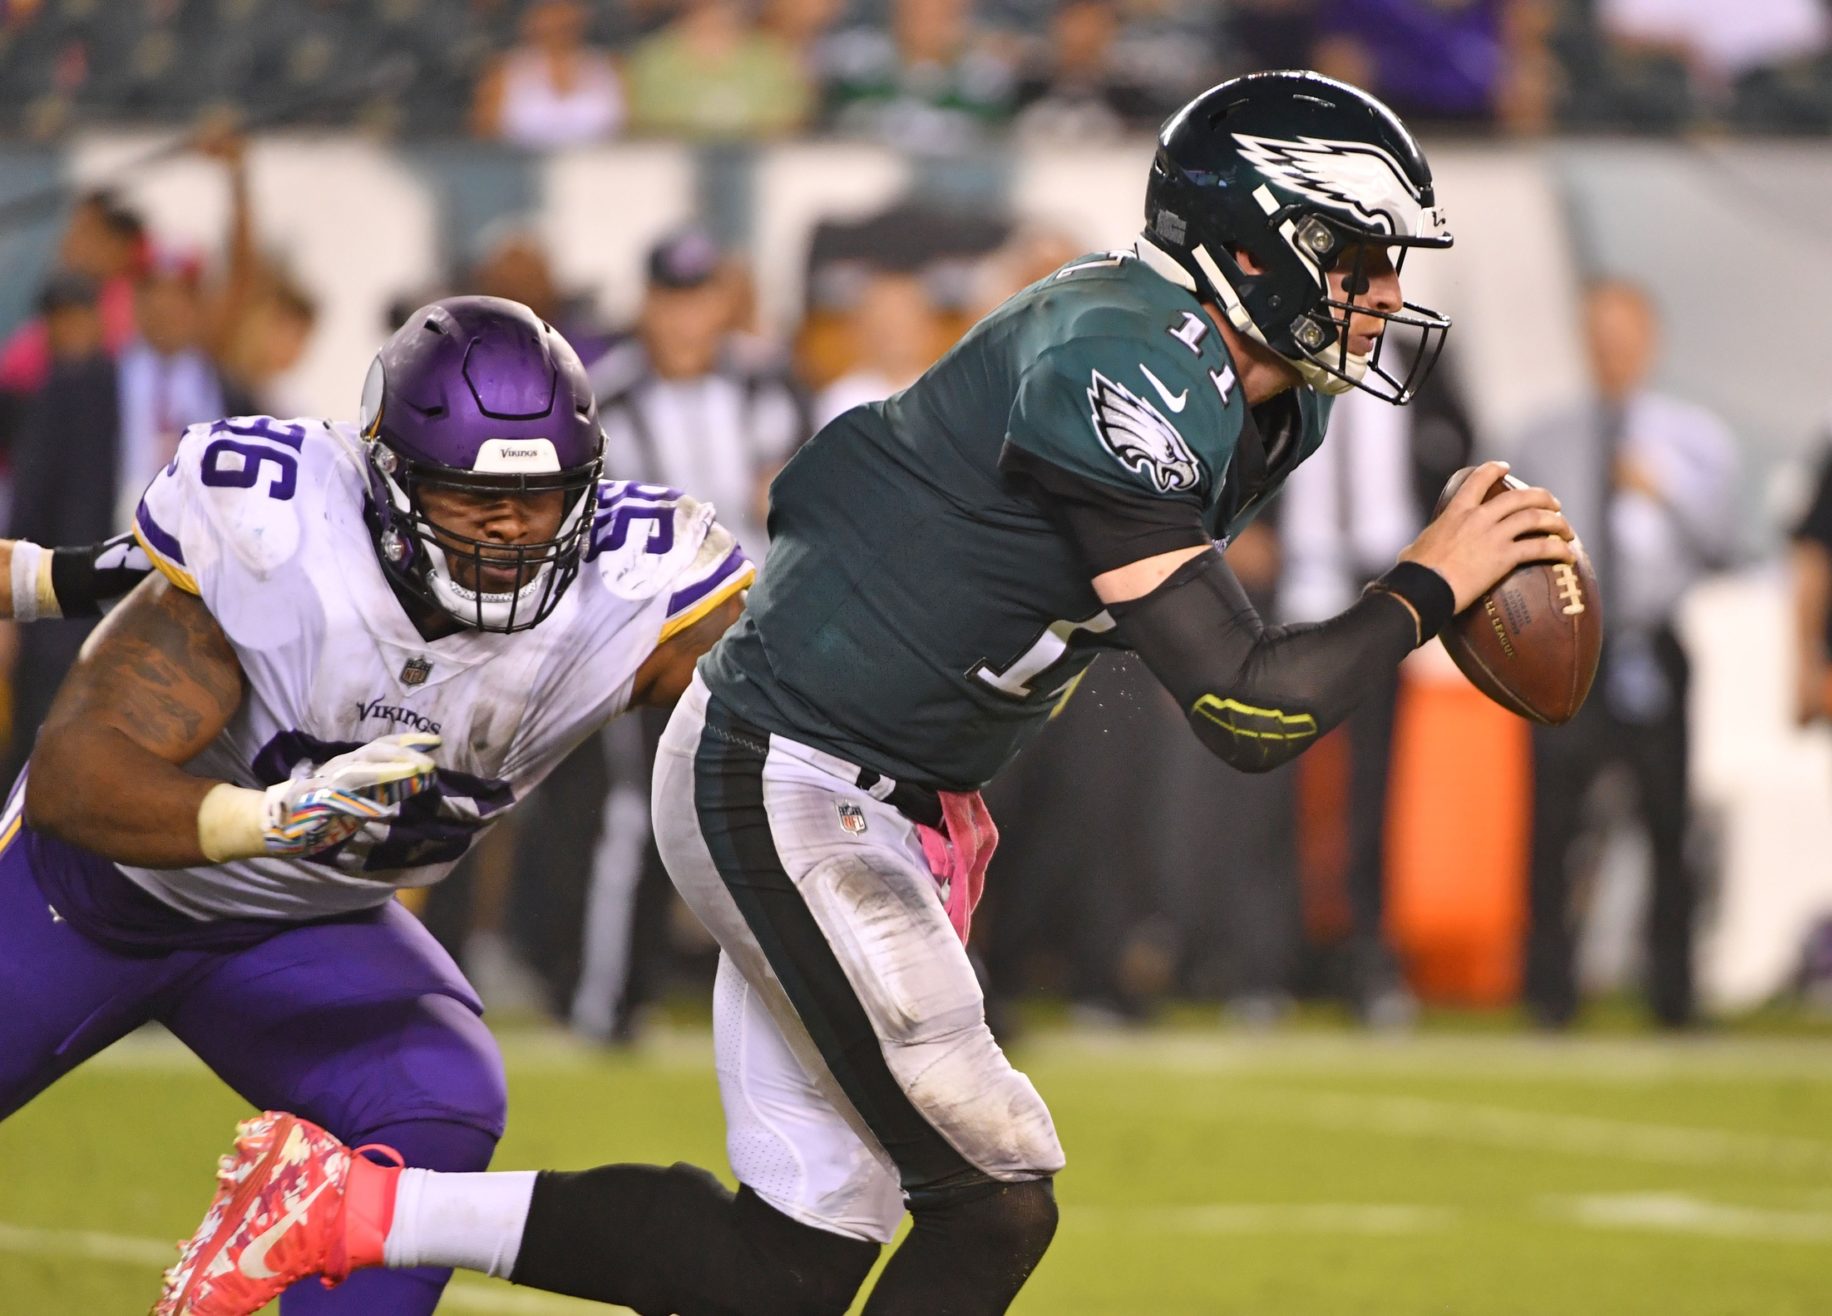 PA and NJ Sportsbooks Are Offering Significant Odds Boosts on the Eagles Today